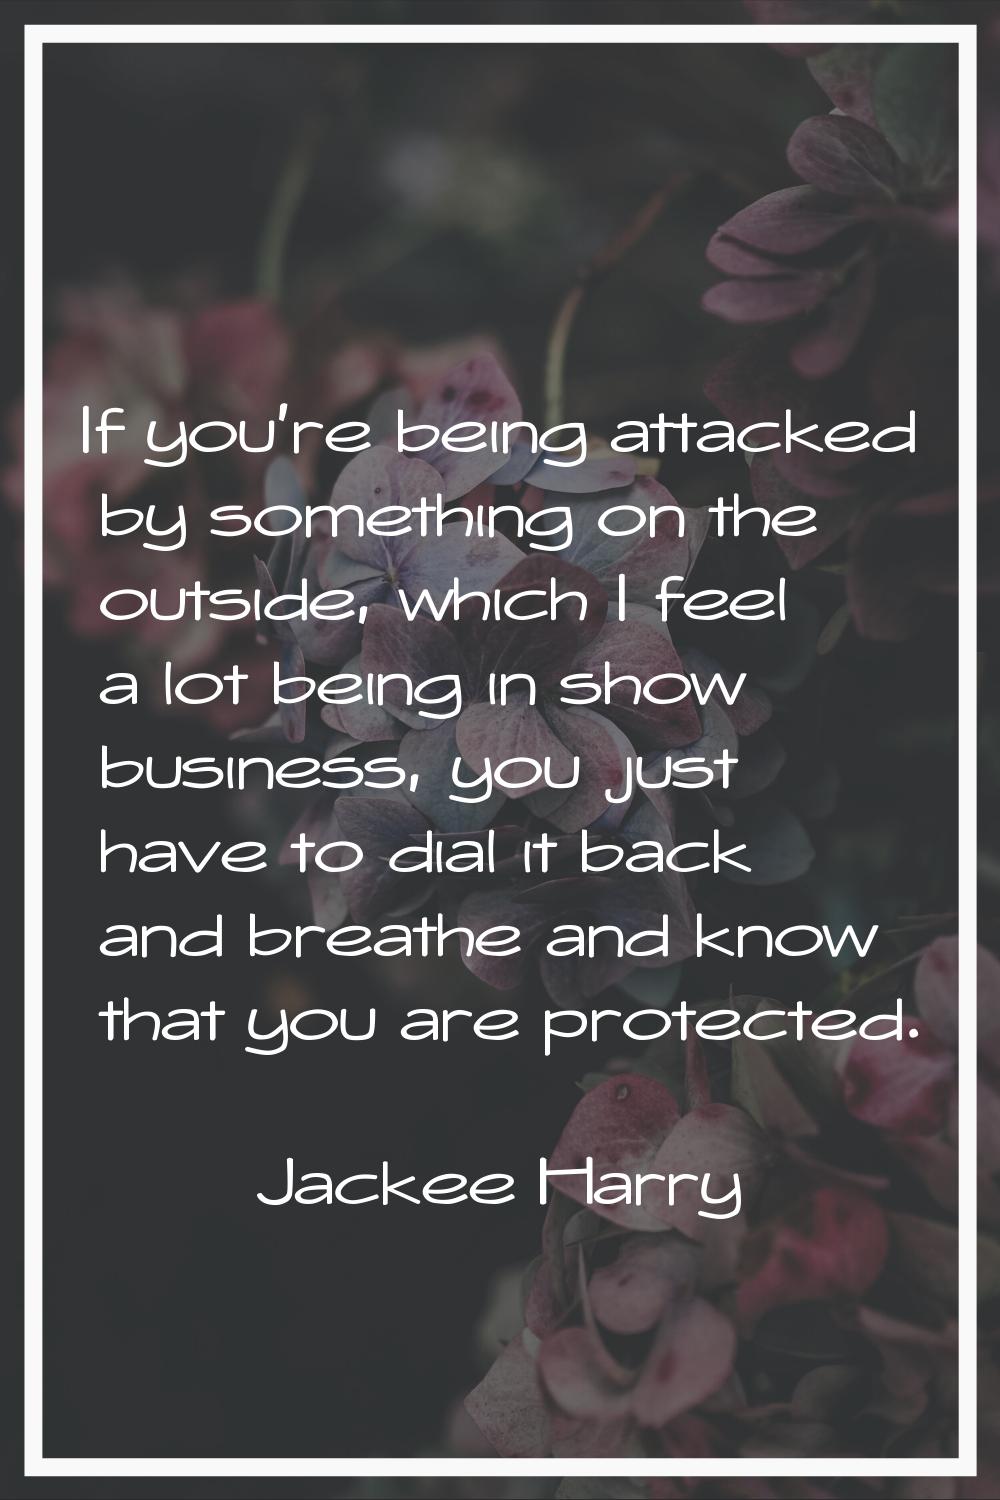 If you're being attacked by something on the outside, which I feel a lot being in show business, yo